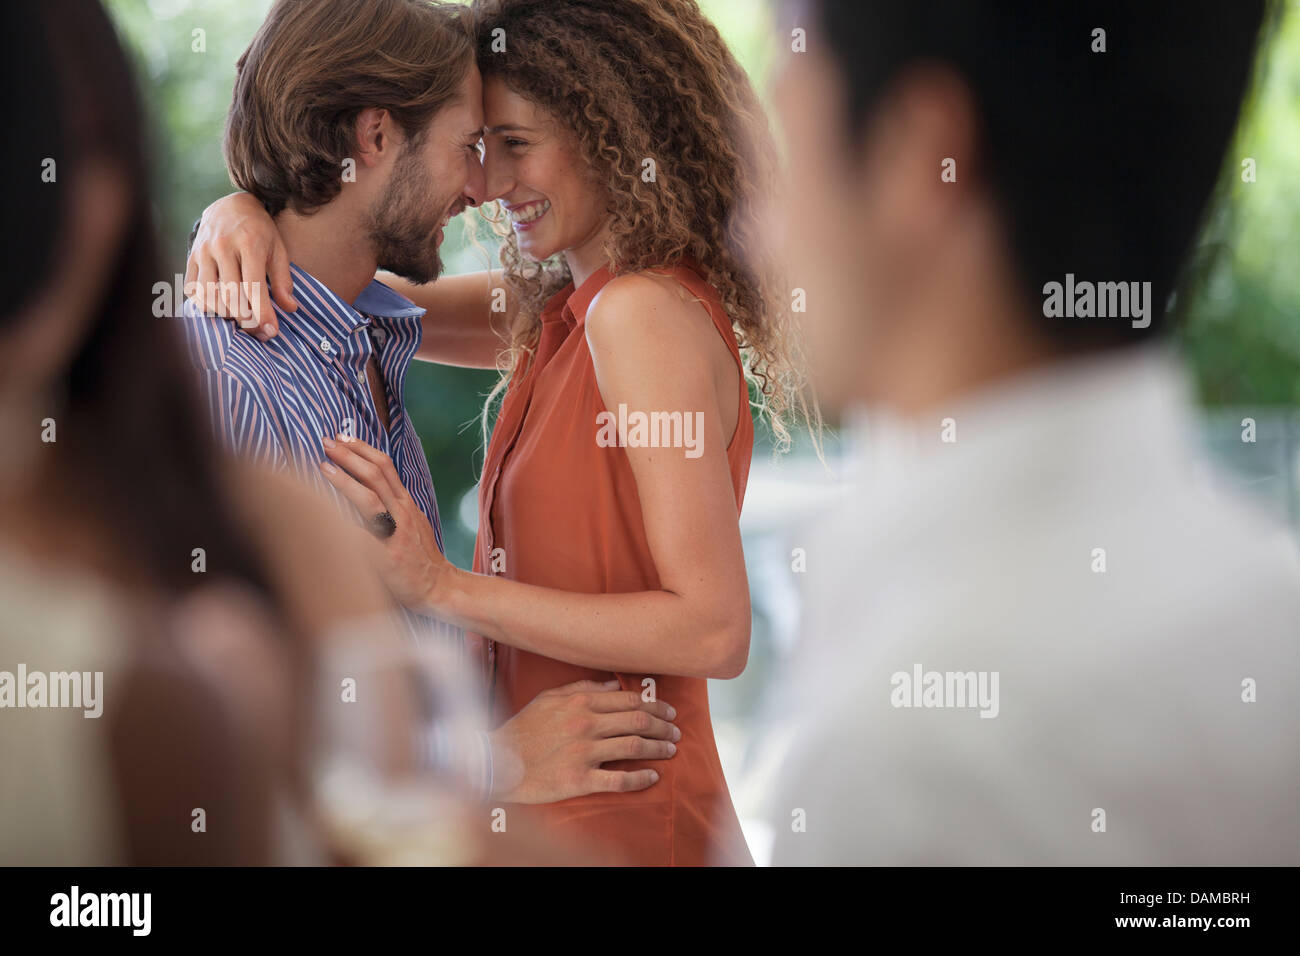 Couple hugging at party Banque D'Images